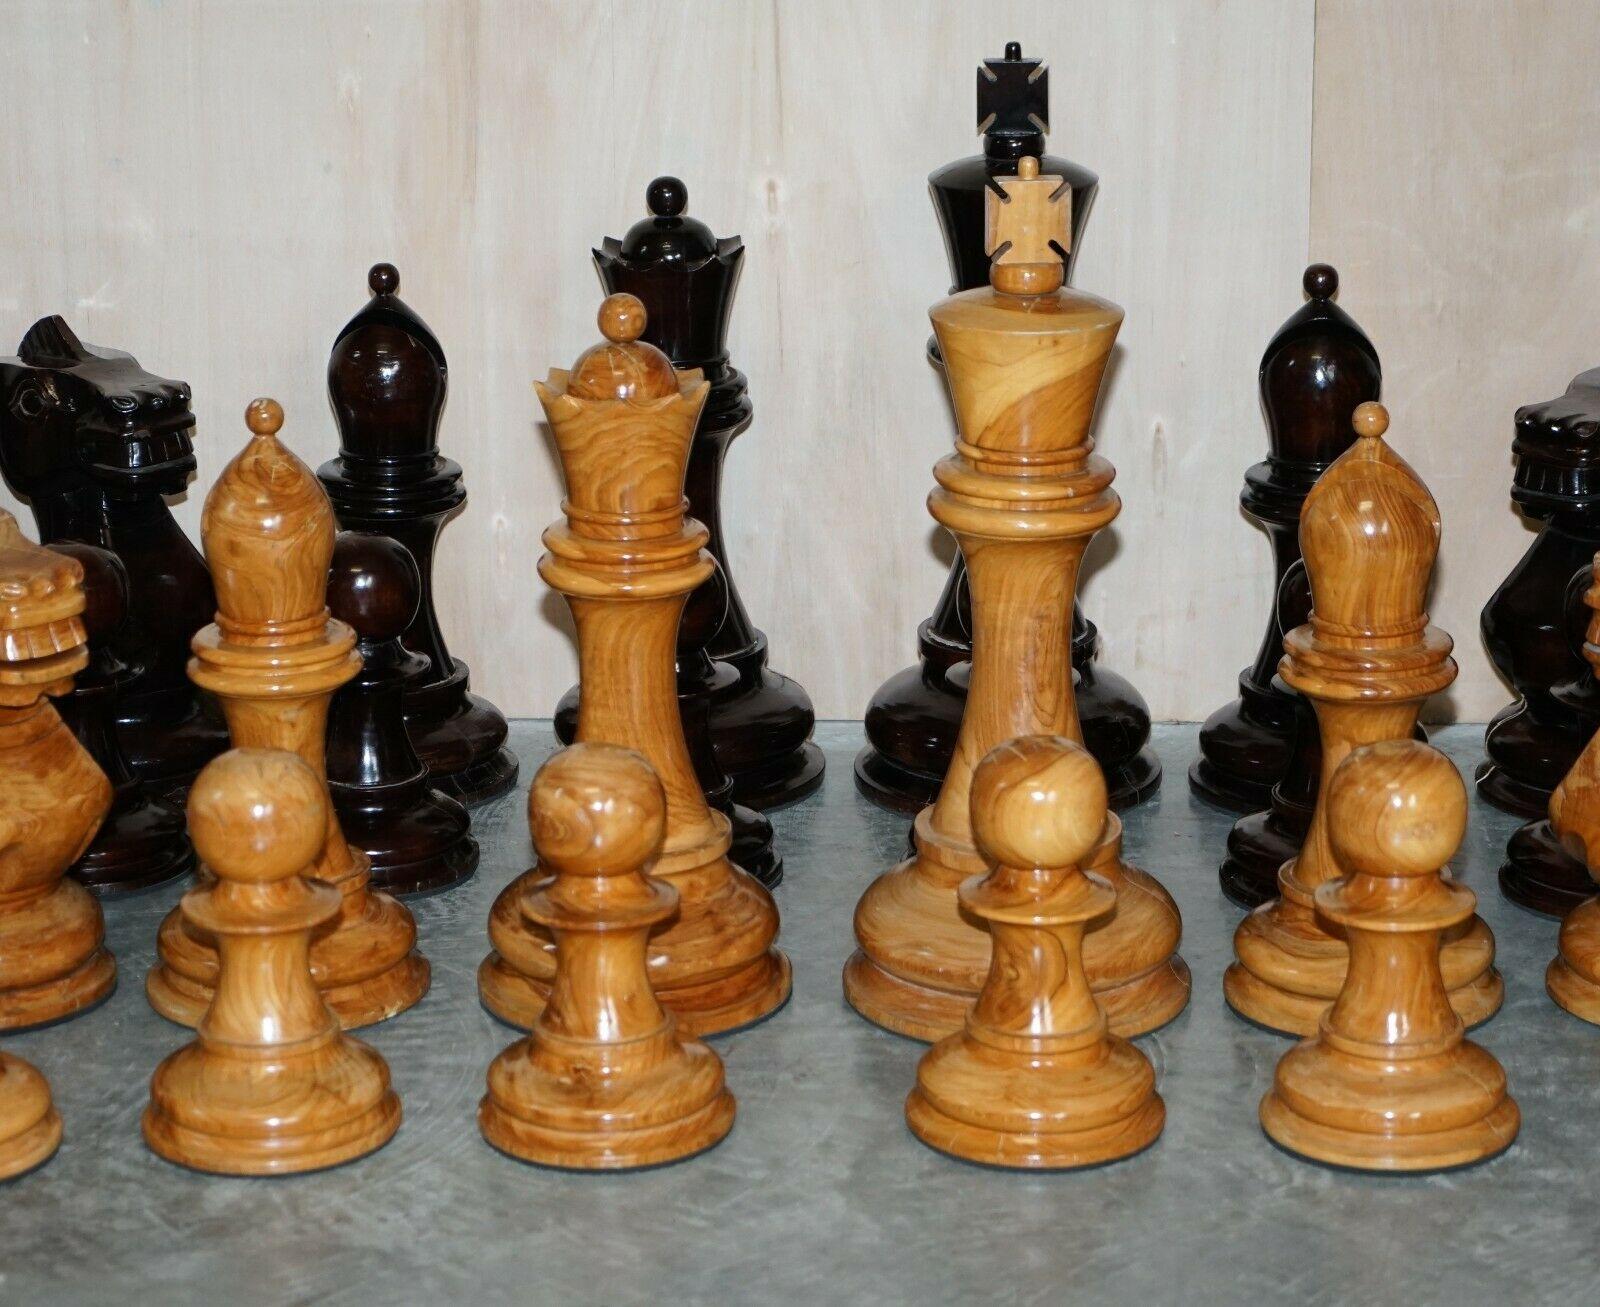 We are delighted to offer for sale this extremely well crafted Giant Chess Set in hand carved hardwood 

A truly stunning and exquisitely made set, the whites (which are actually brown) have a glorious timber patina, they look like pieces of art and